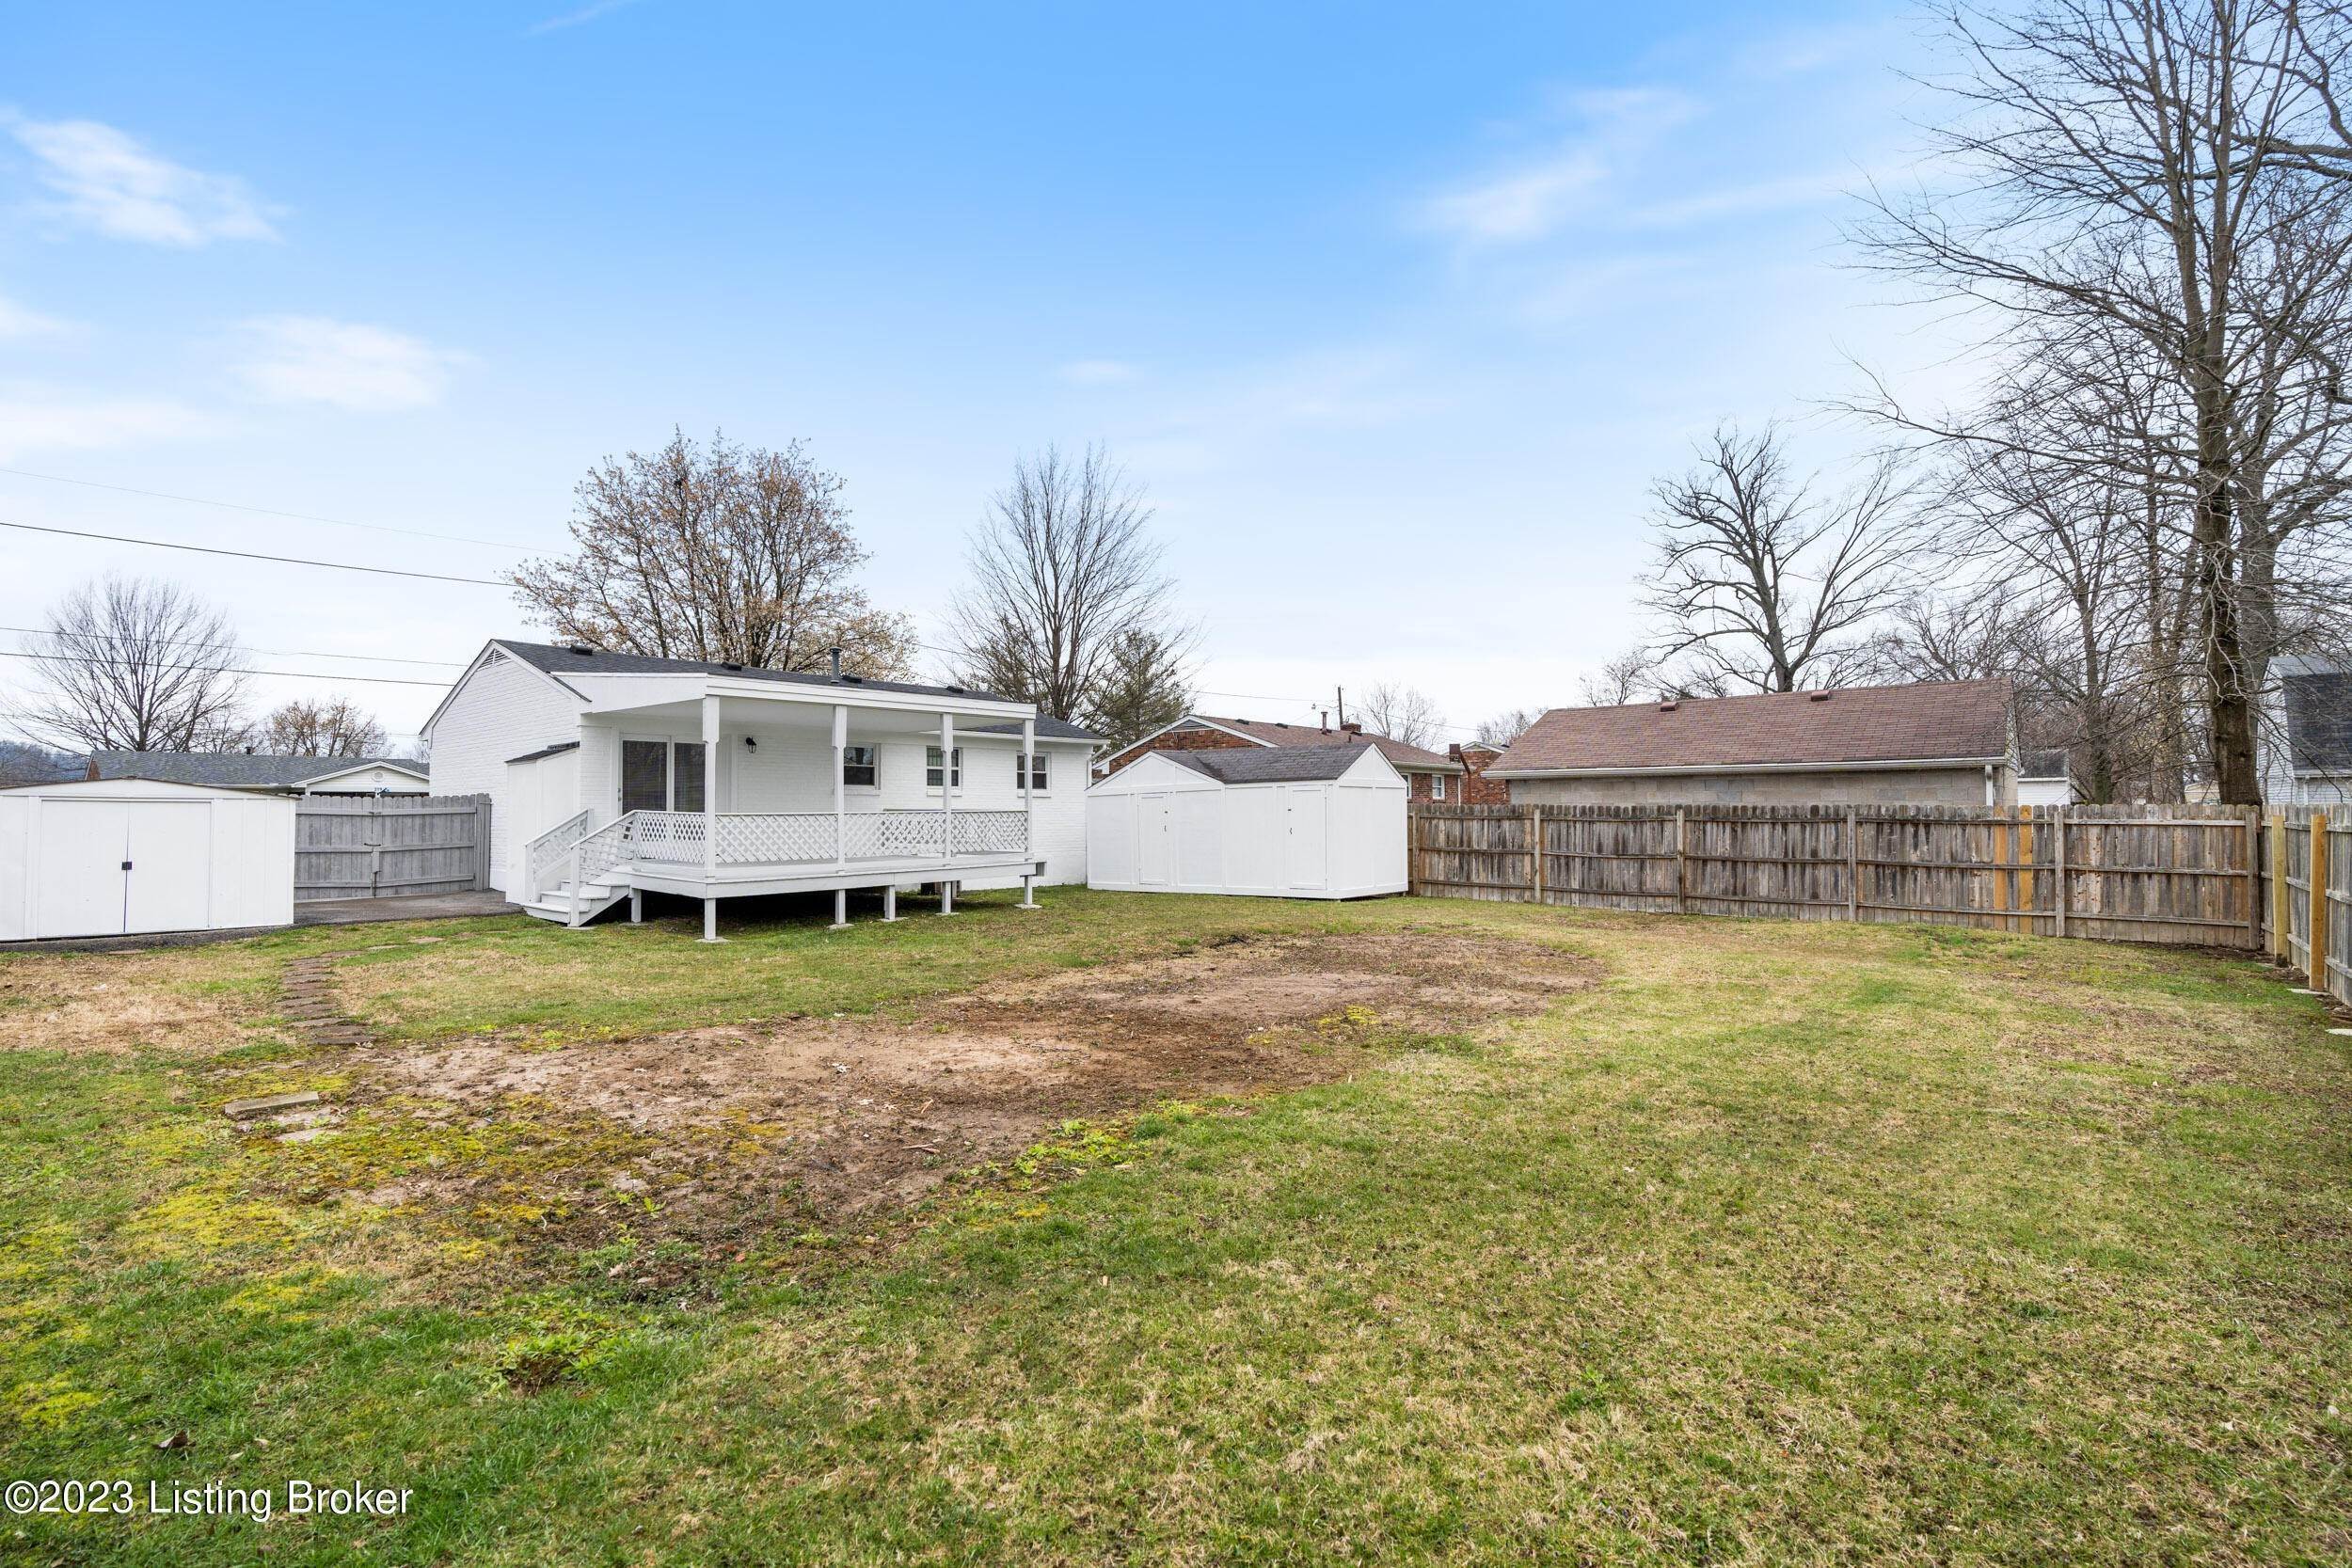 40. Single Family at Louisville, KY 40229